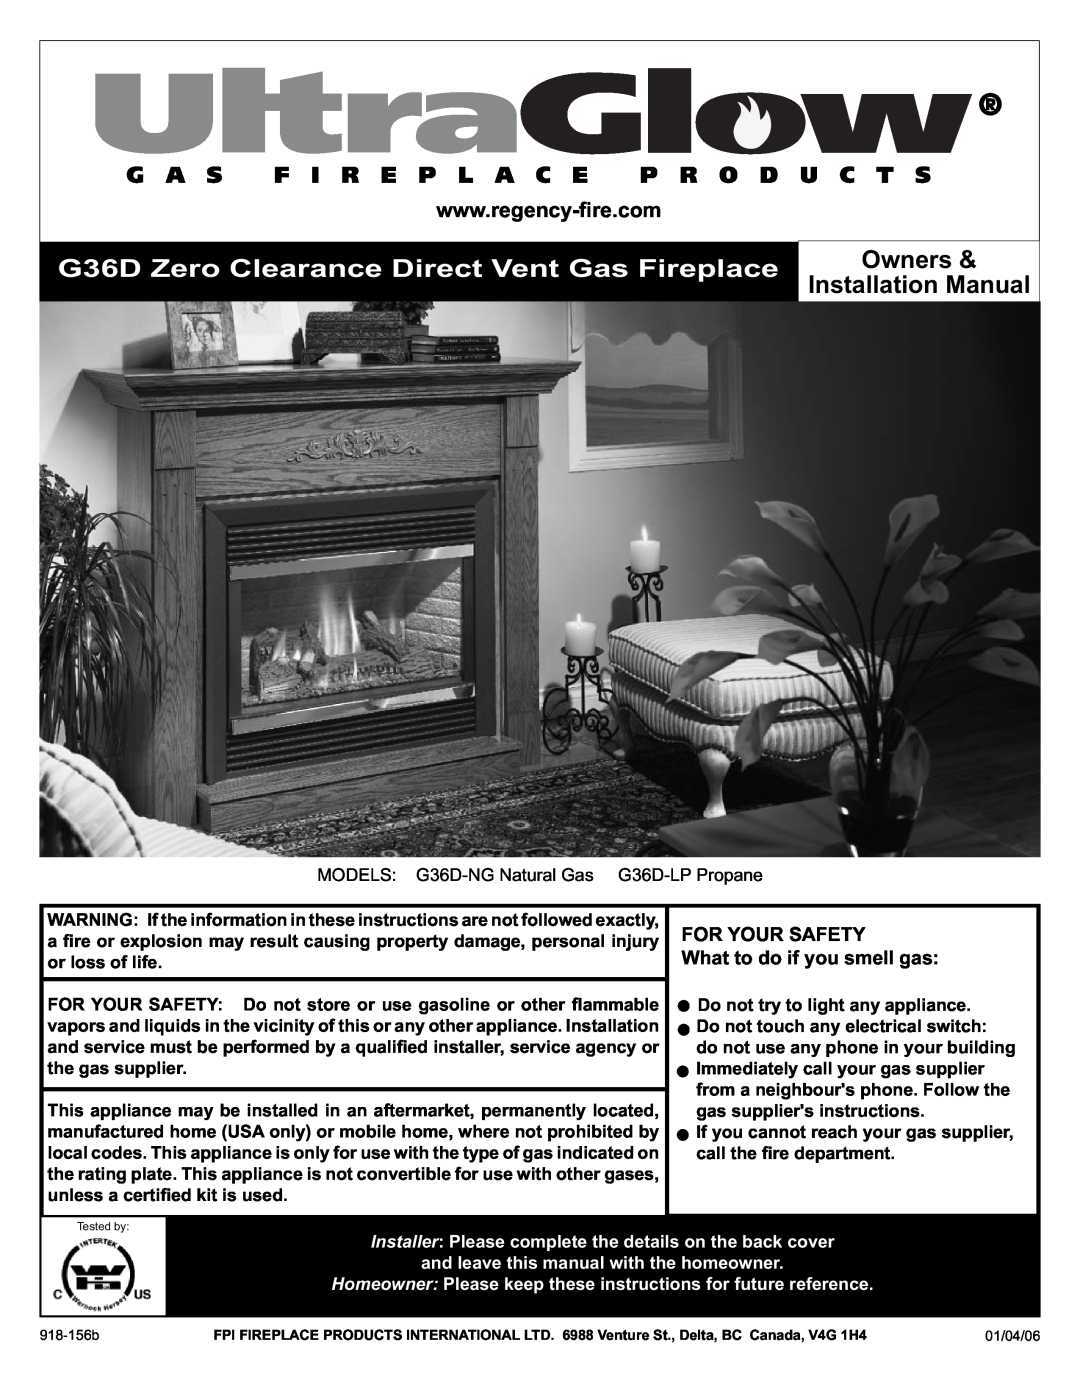 Regency G36D-NG NATURAL GAS installation manual G36D Zero Clearance Direct Vent Gas Fireplace, Owners, Installation Manual 